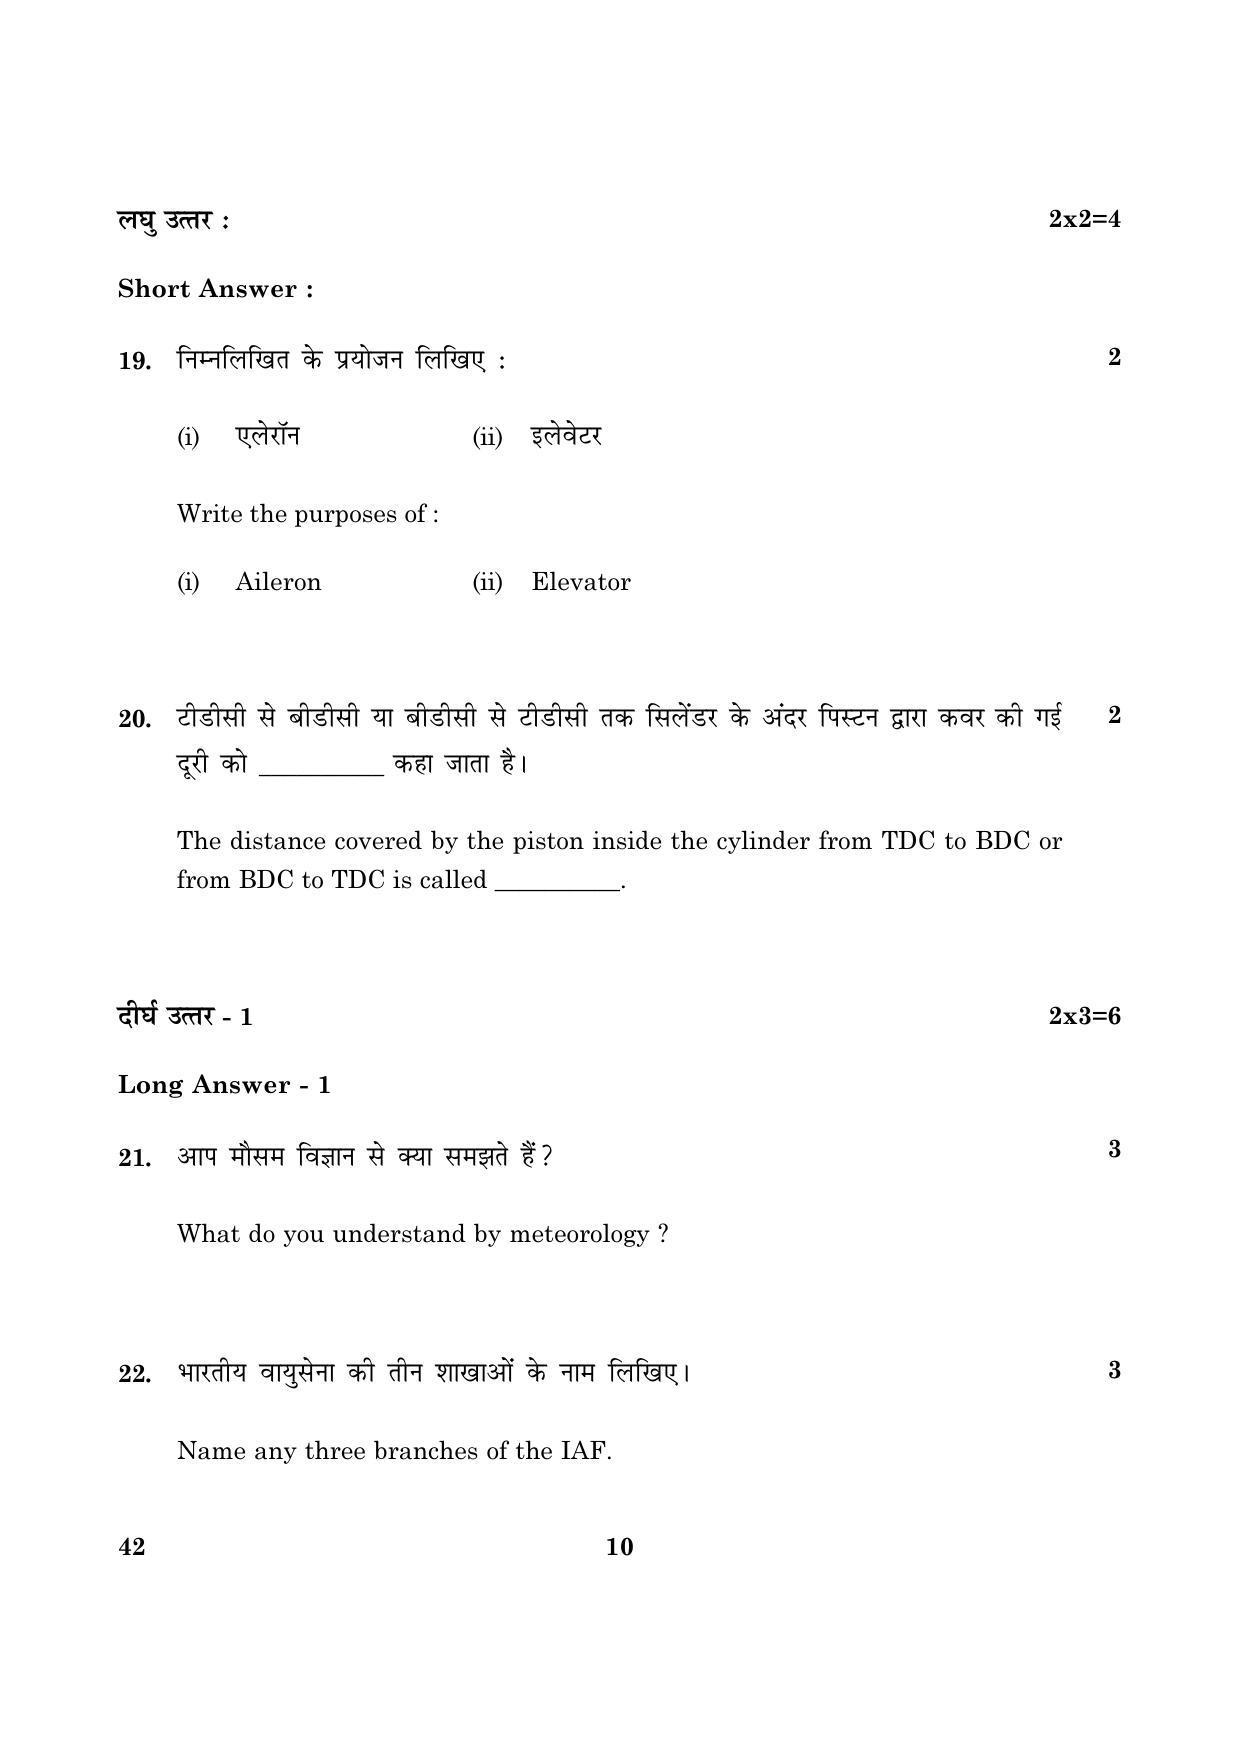 CBSE Class 12 042 National Cadet Corps (NCC) 2016 Question Paper - Page 10